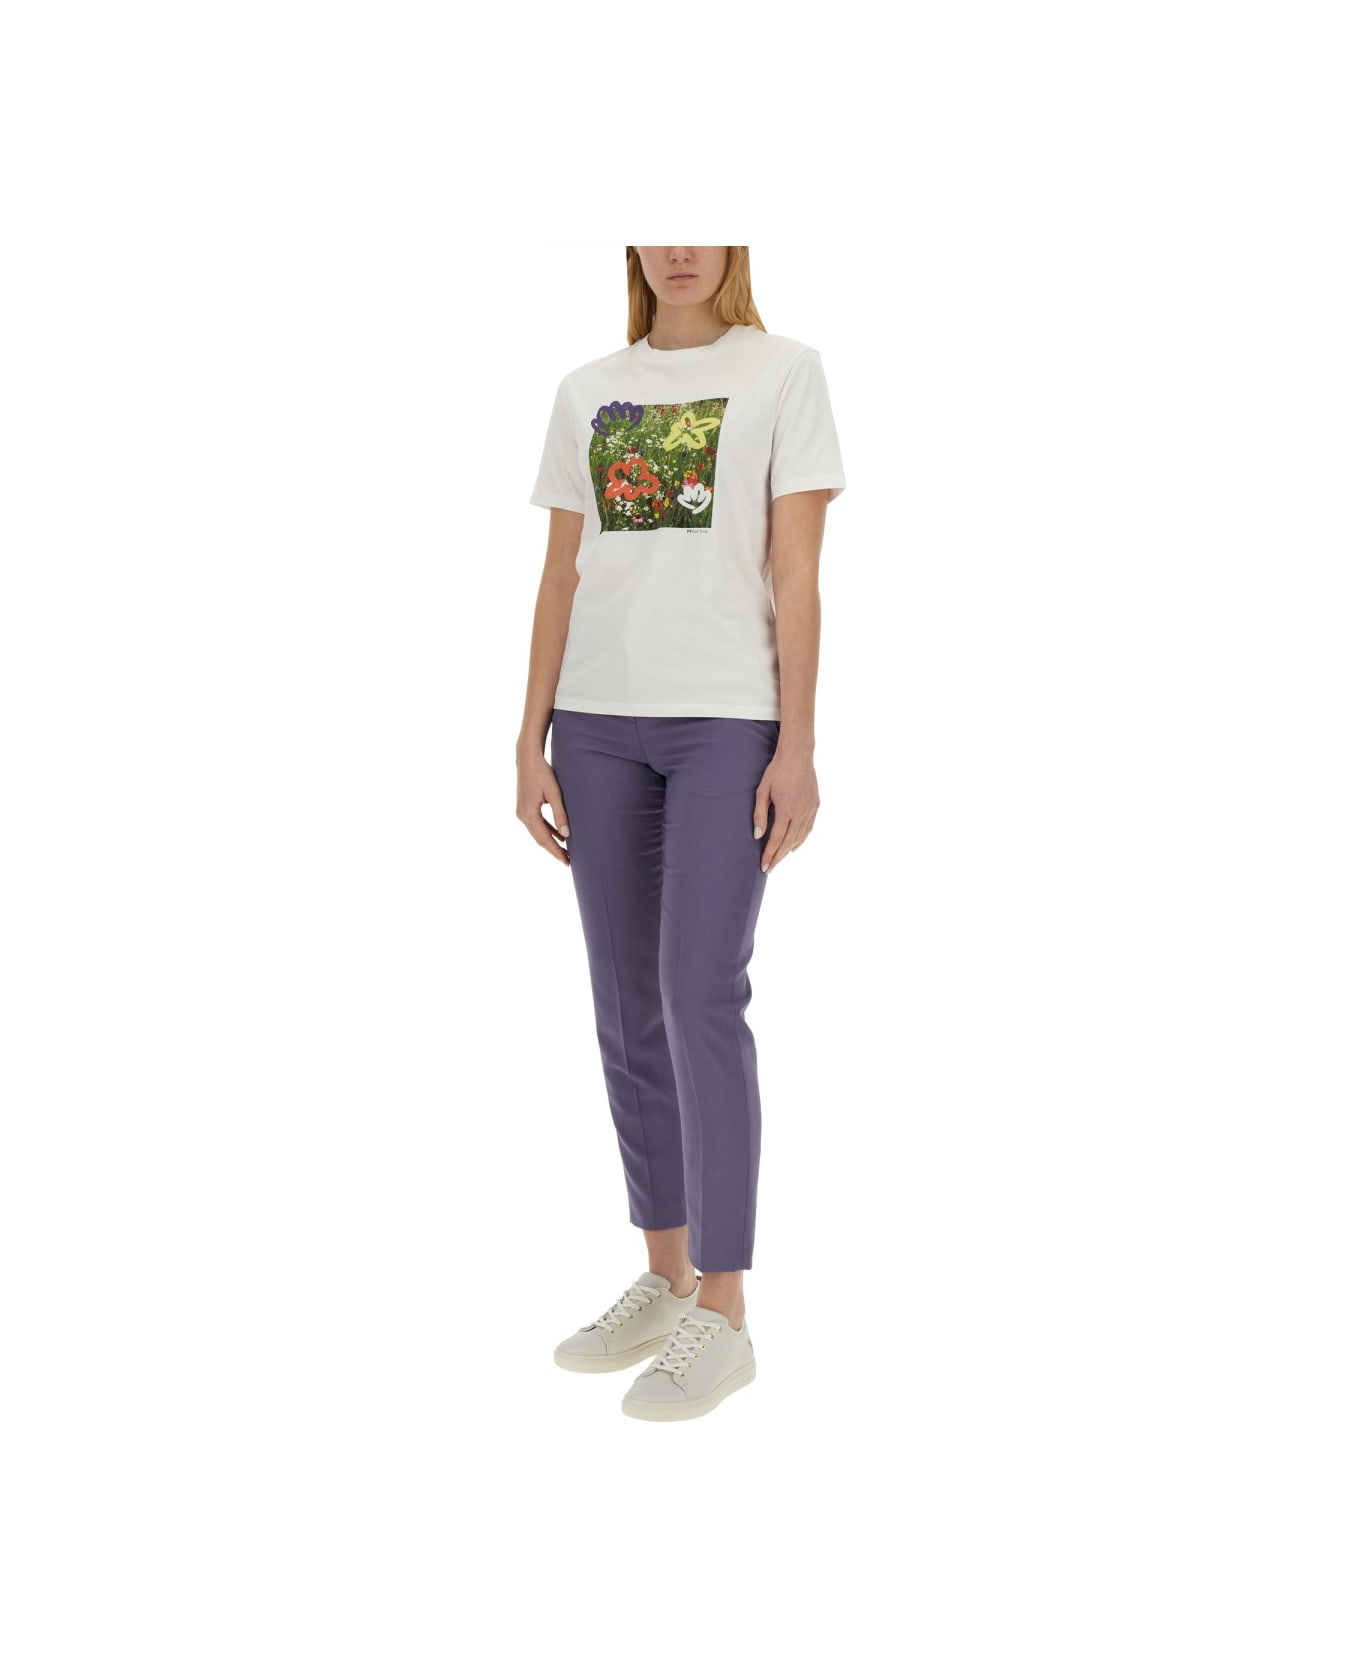 PS by Paul Smith "wildflowers" T-shirt - WHITE